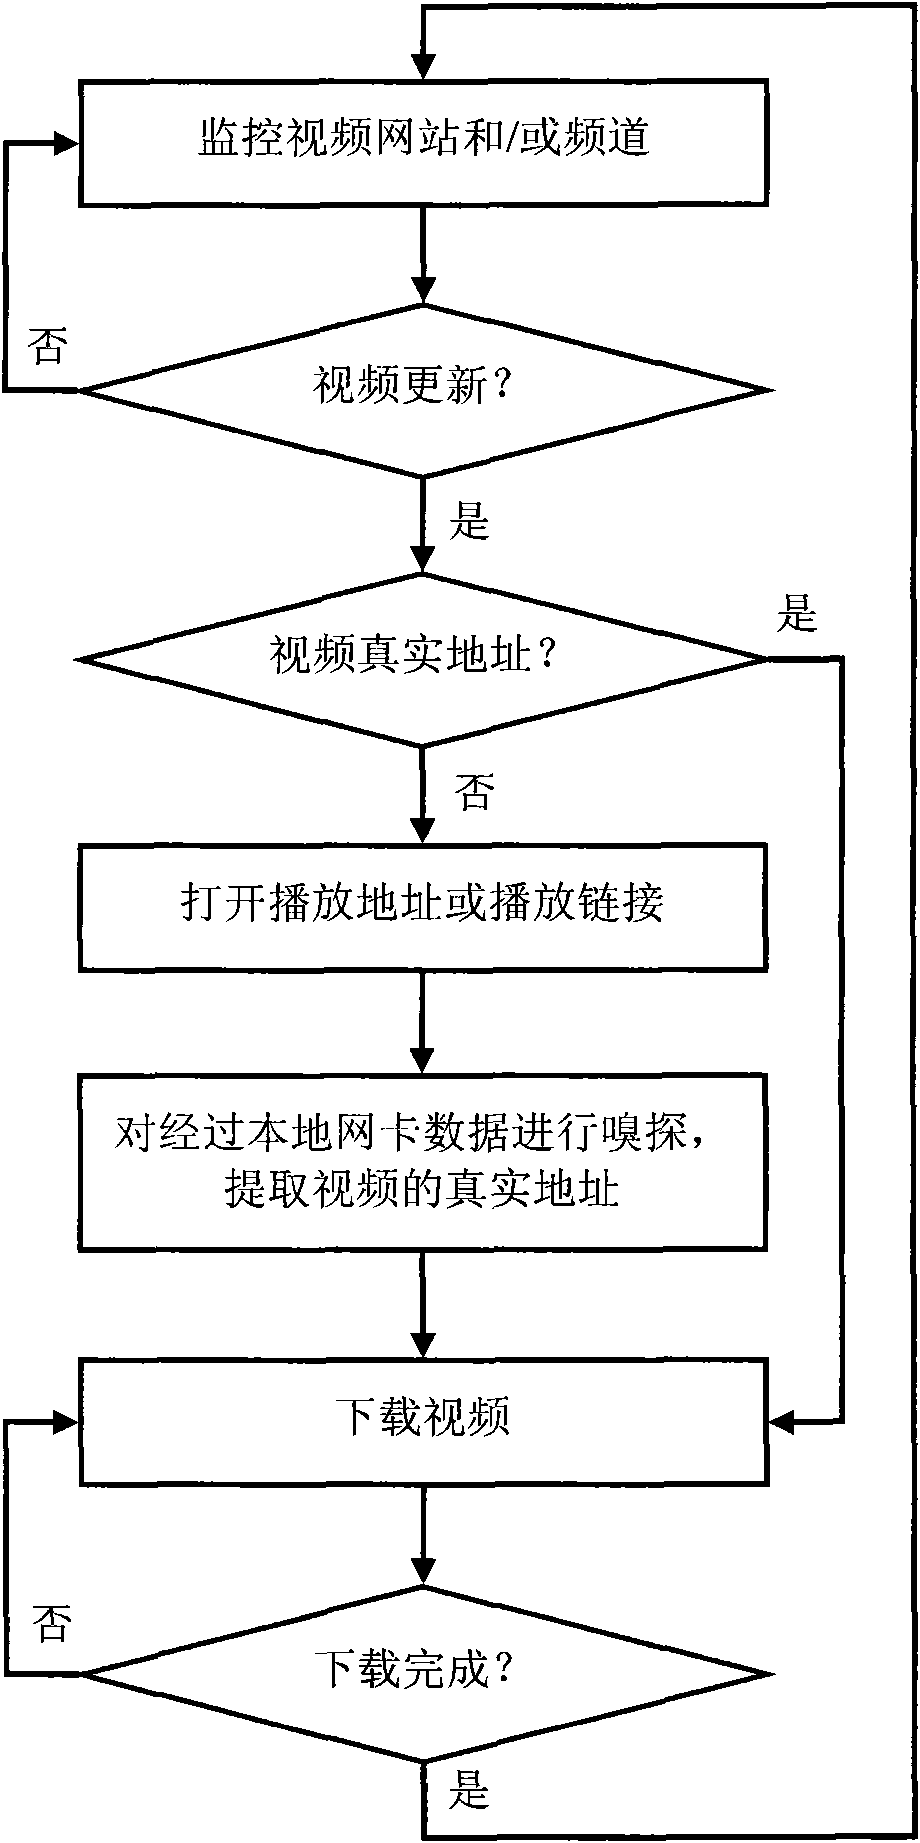 Method and system for downloading network video